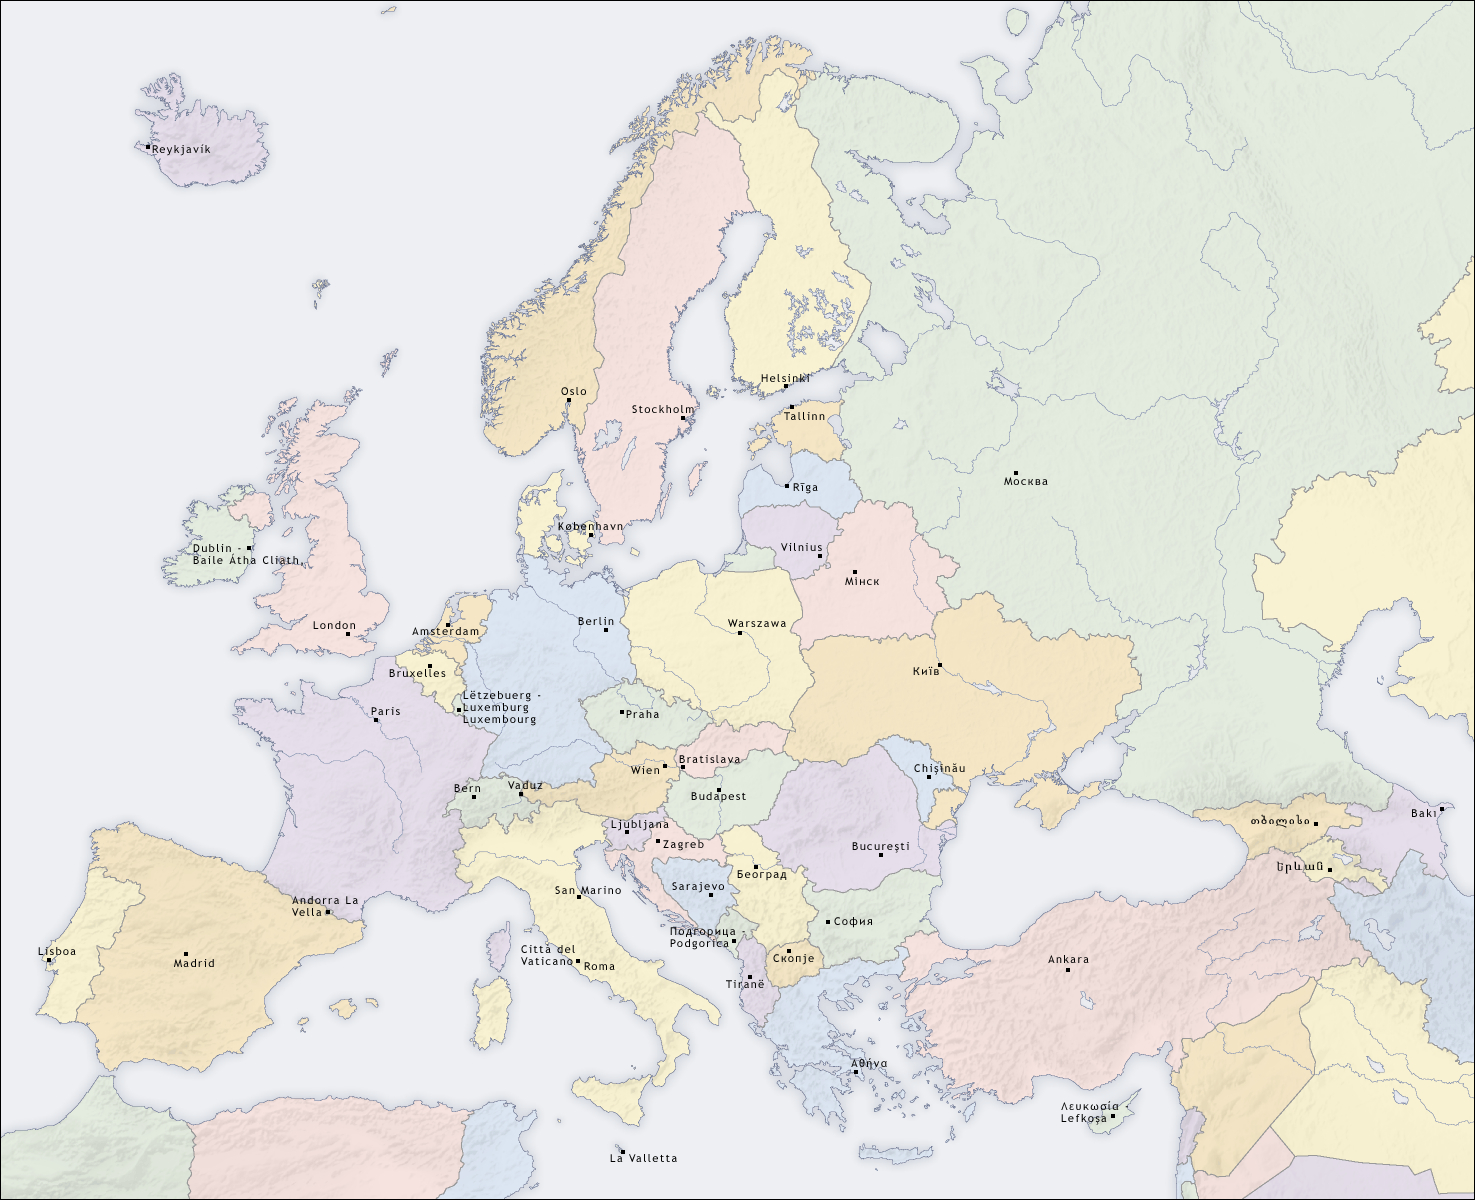 Europe Map With Capitals And Cities | Casami concernant Carte De L Europe Et Capitale